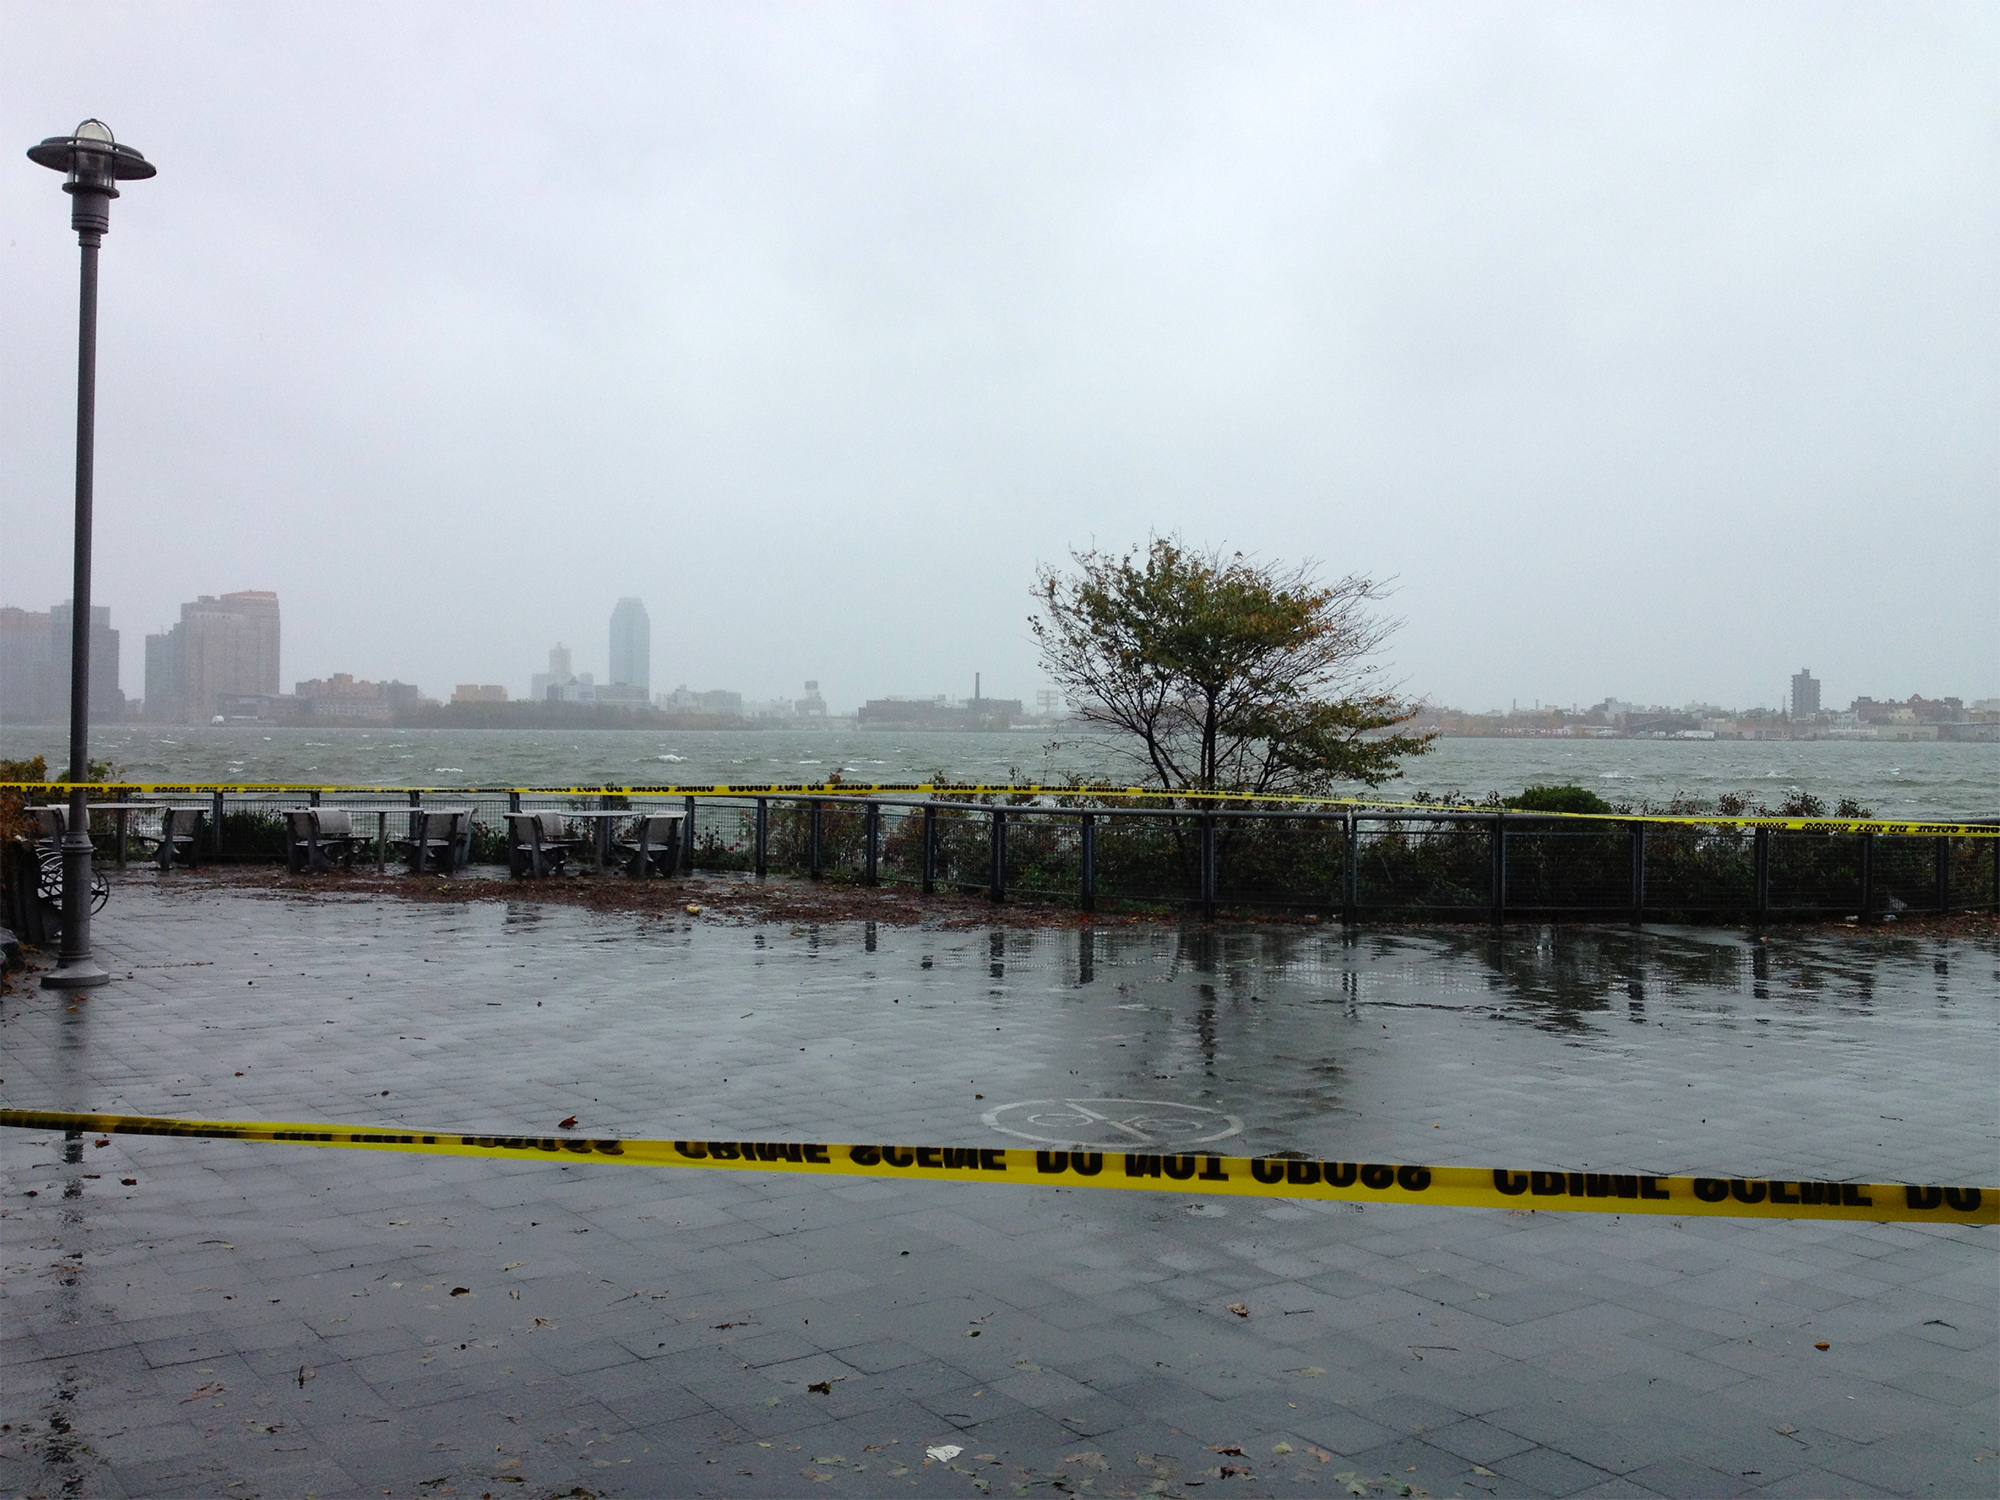 A waterfront promenade taped off with police tape during Hurricane Sandy that looks out onto Brooklyn on the far shore.